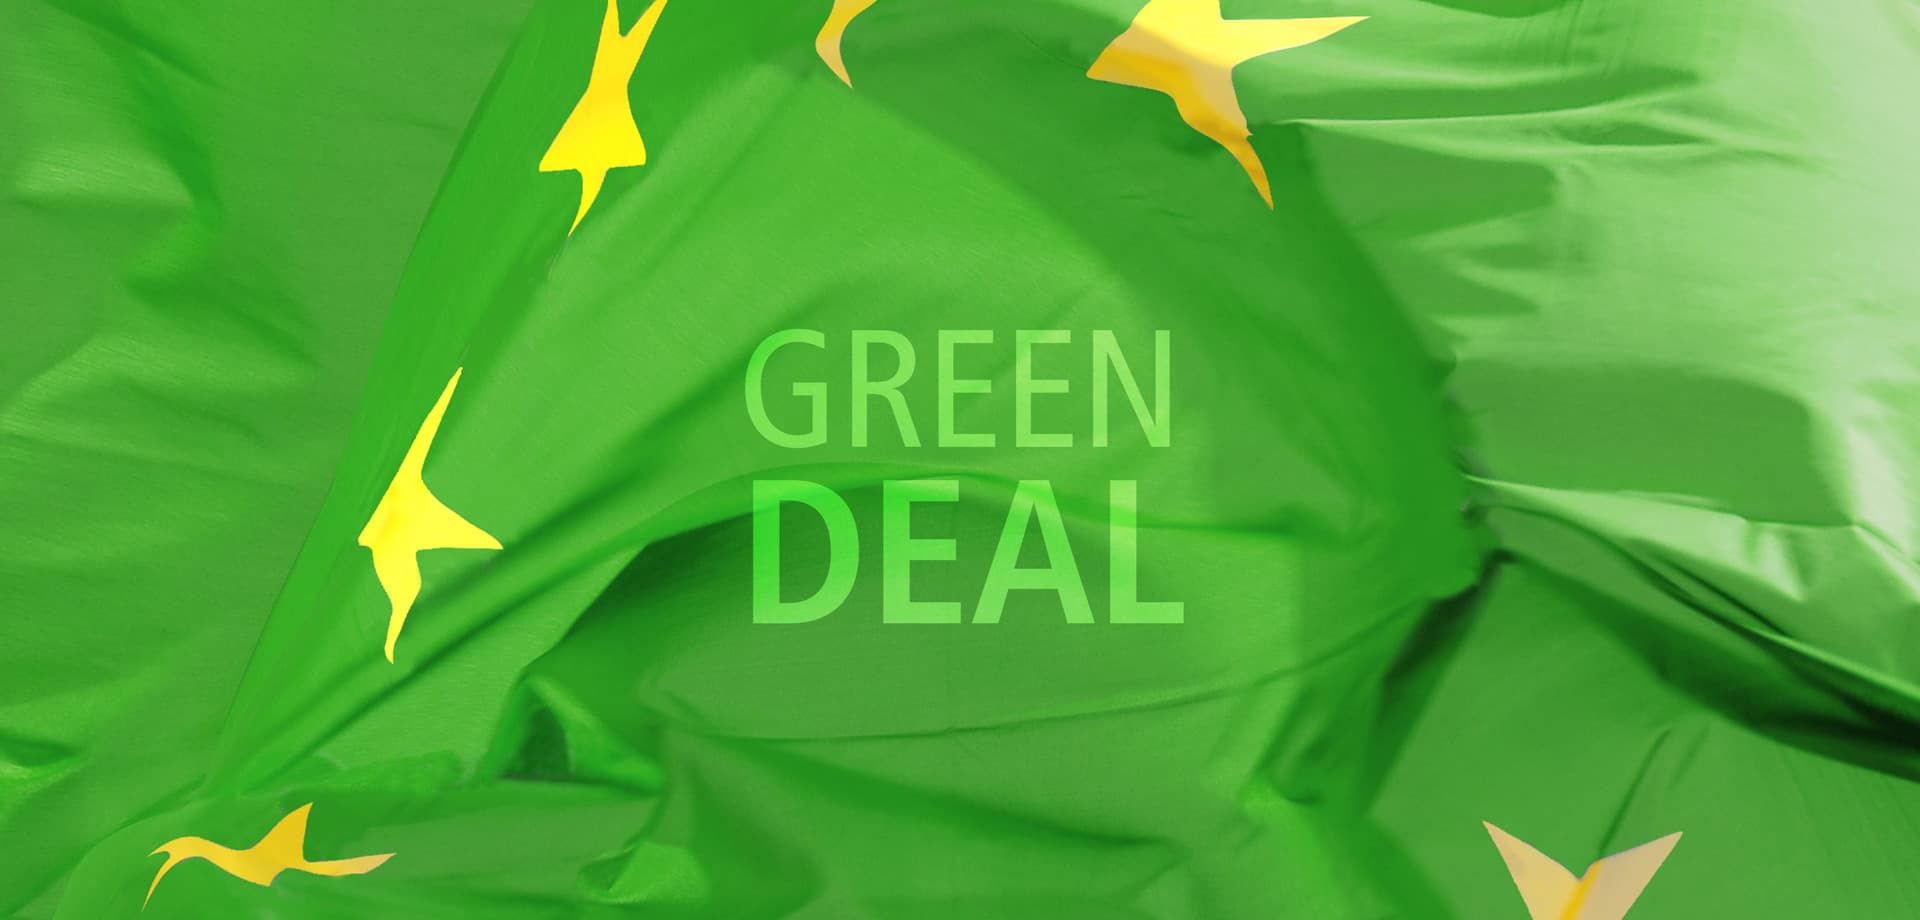 Making the Green Deal a success